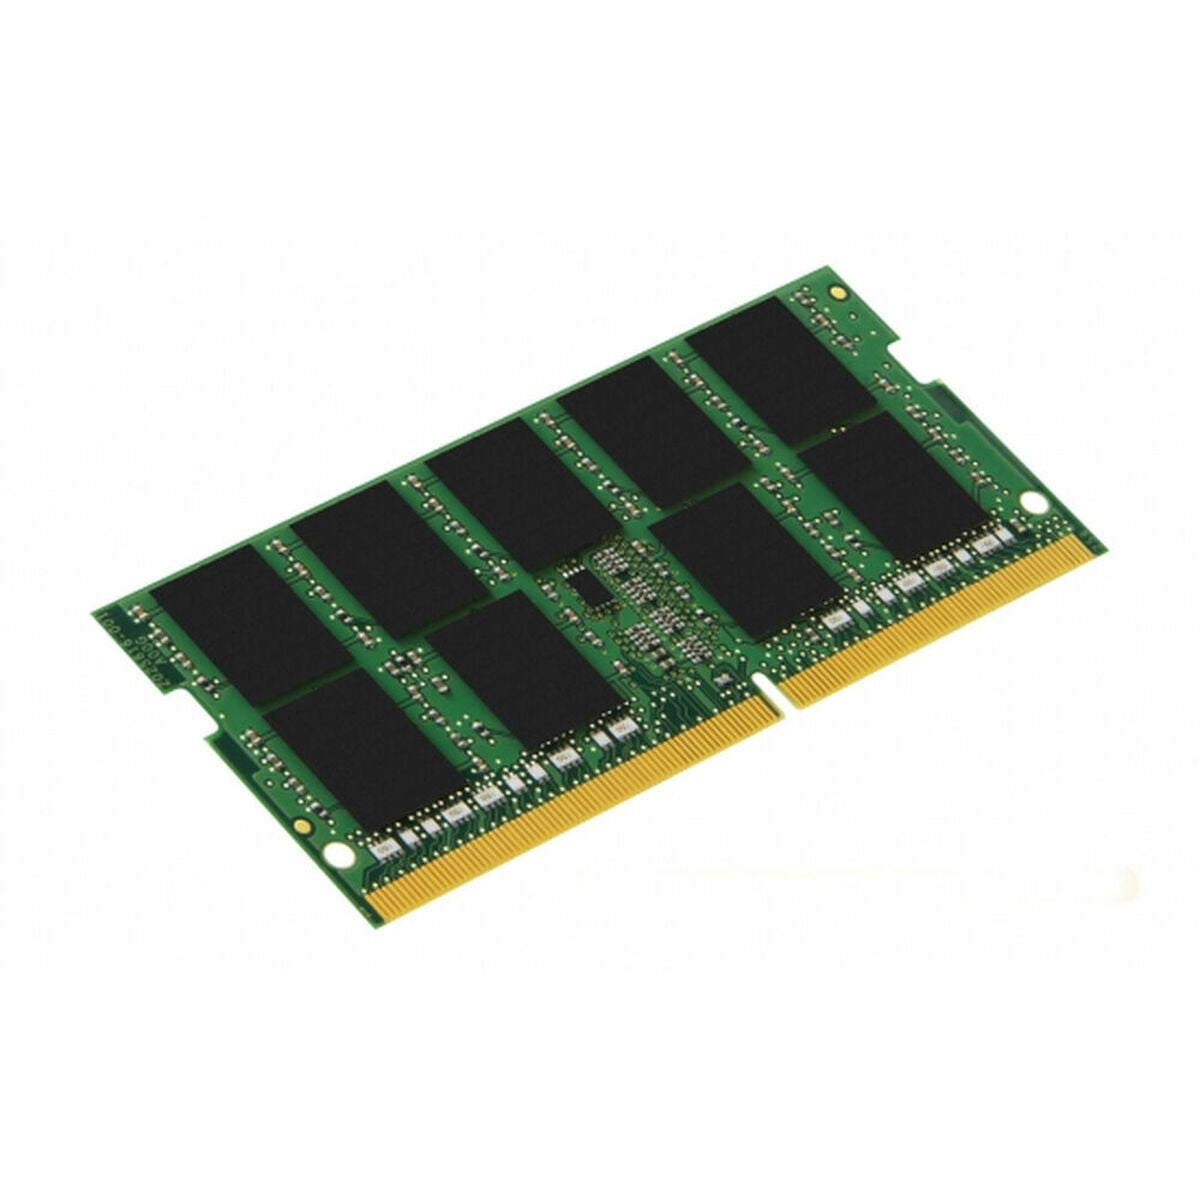 RAM Memory Kingston KCP426SS6/4          4 GB DDR4, Kingston, Computing, Components, ram-memory-kingston-kcp426ss6-4-4-gb-ddr4, Brand_Kingston, category-reference-2609, category-reference-2803, category-reference-2807, category-reference-t-19685, category-reference-t-19912, category-reference-t-21360, computers / components, Condition_NEW, Price_20 - 50, Teleworking, RiotNook